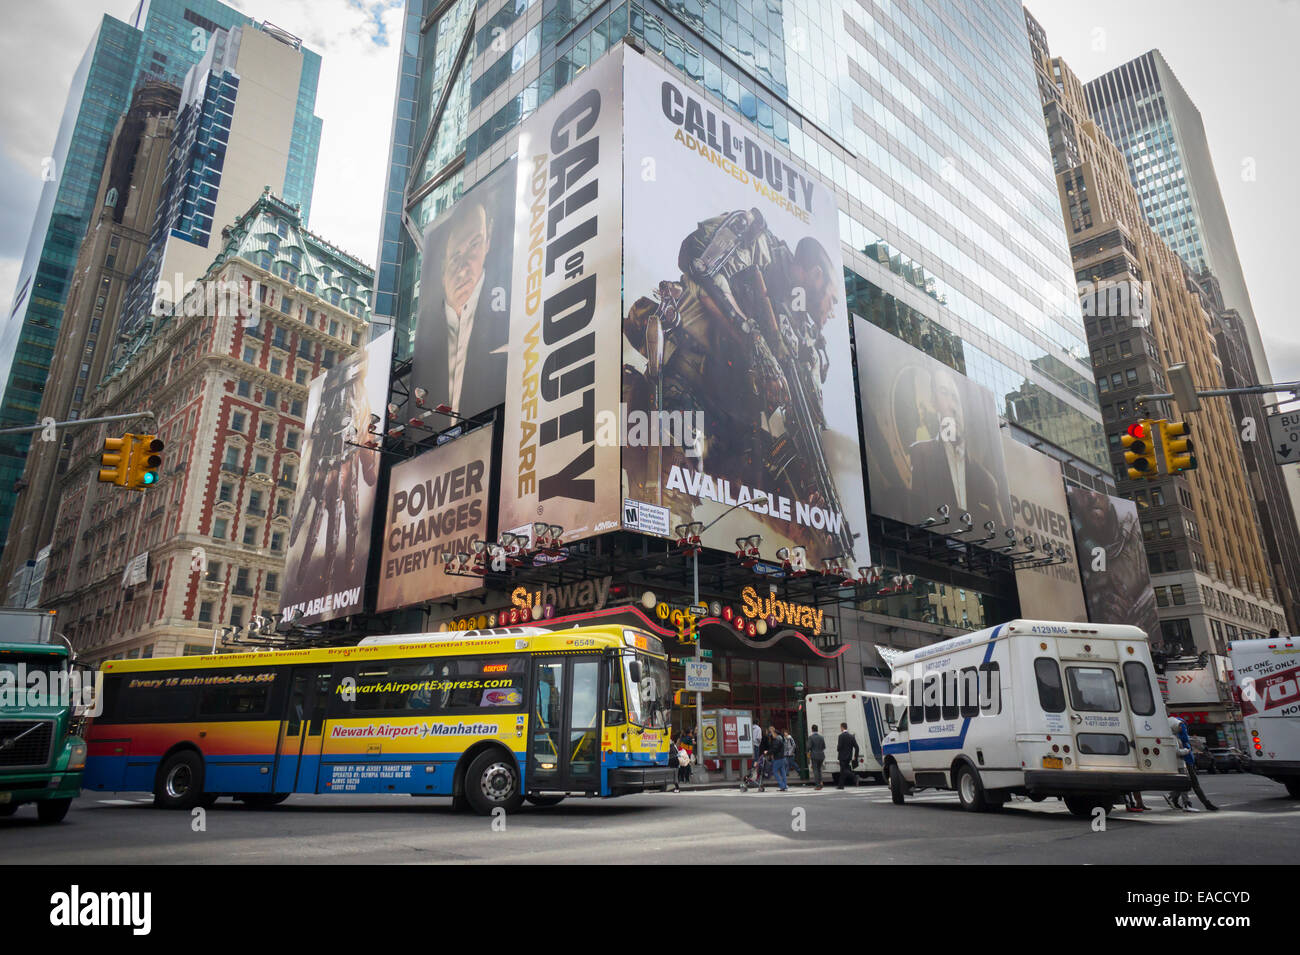 A billboard for the 'Call of Duty: Advanced Warfare'  multiplayer videogame in Times Square in New York Stock Photo